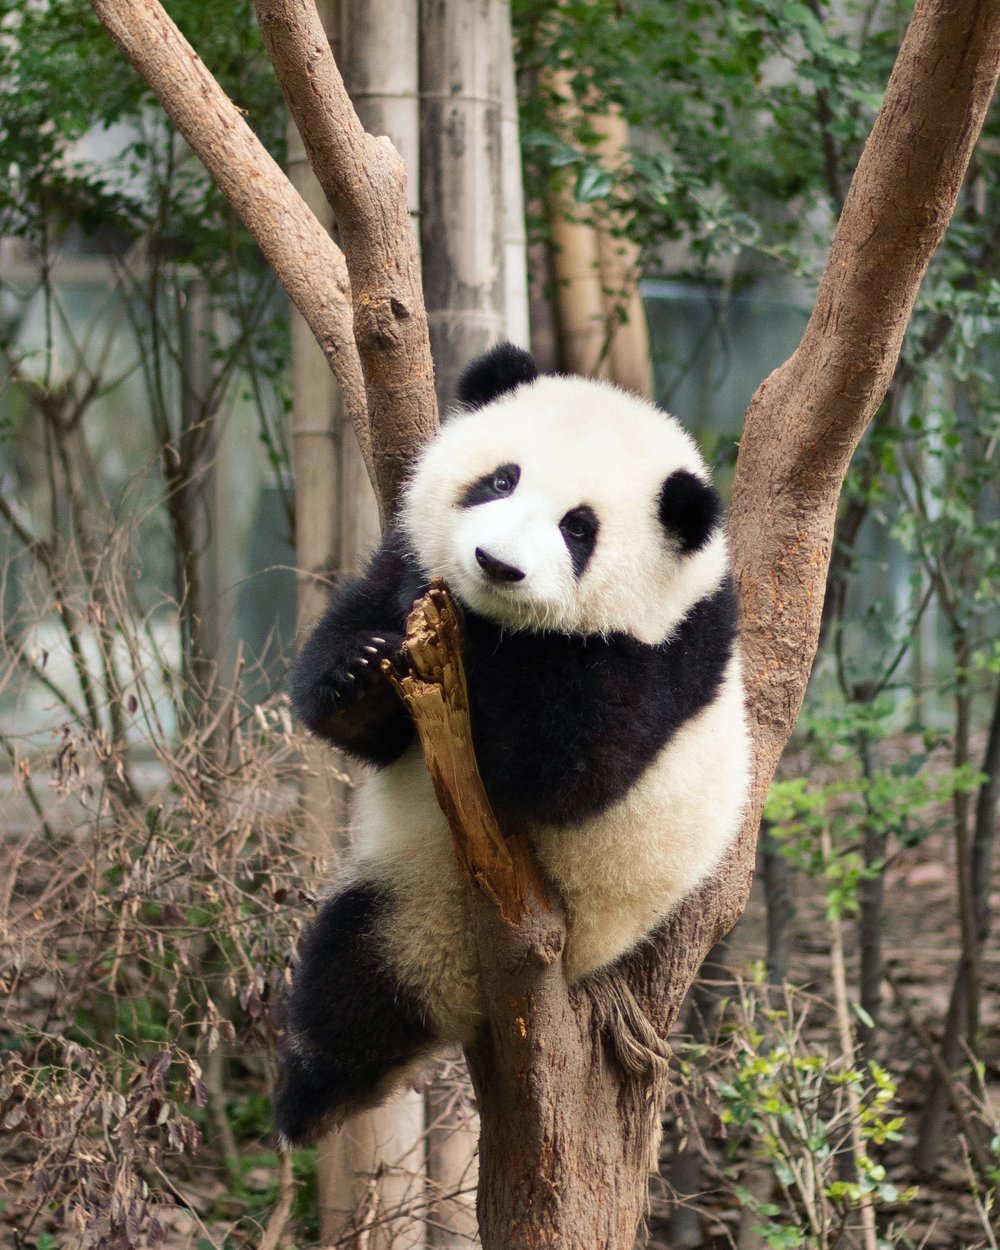 Plan your trip to China with discounted tickets to Chengdu Panda Breeding Center